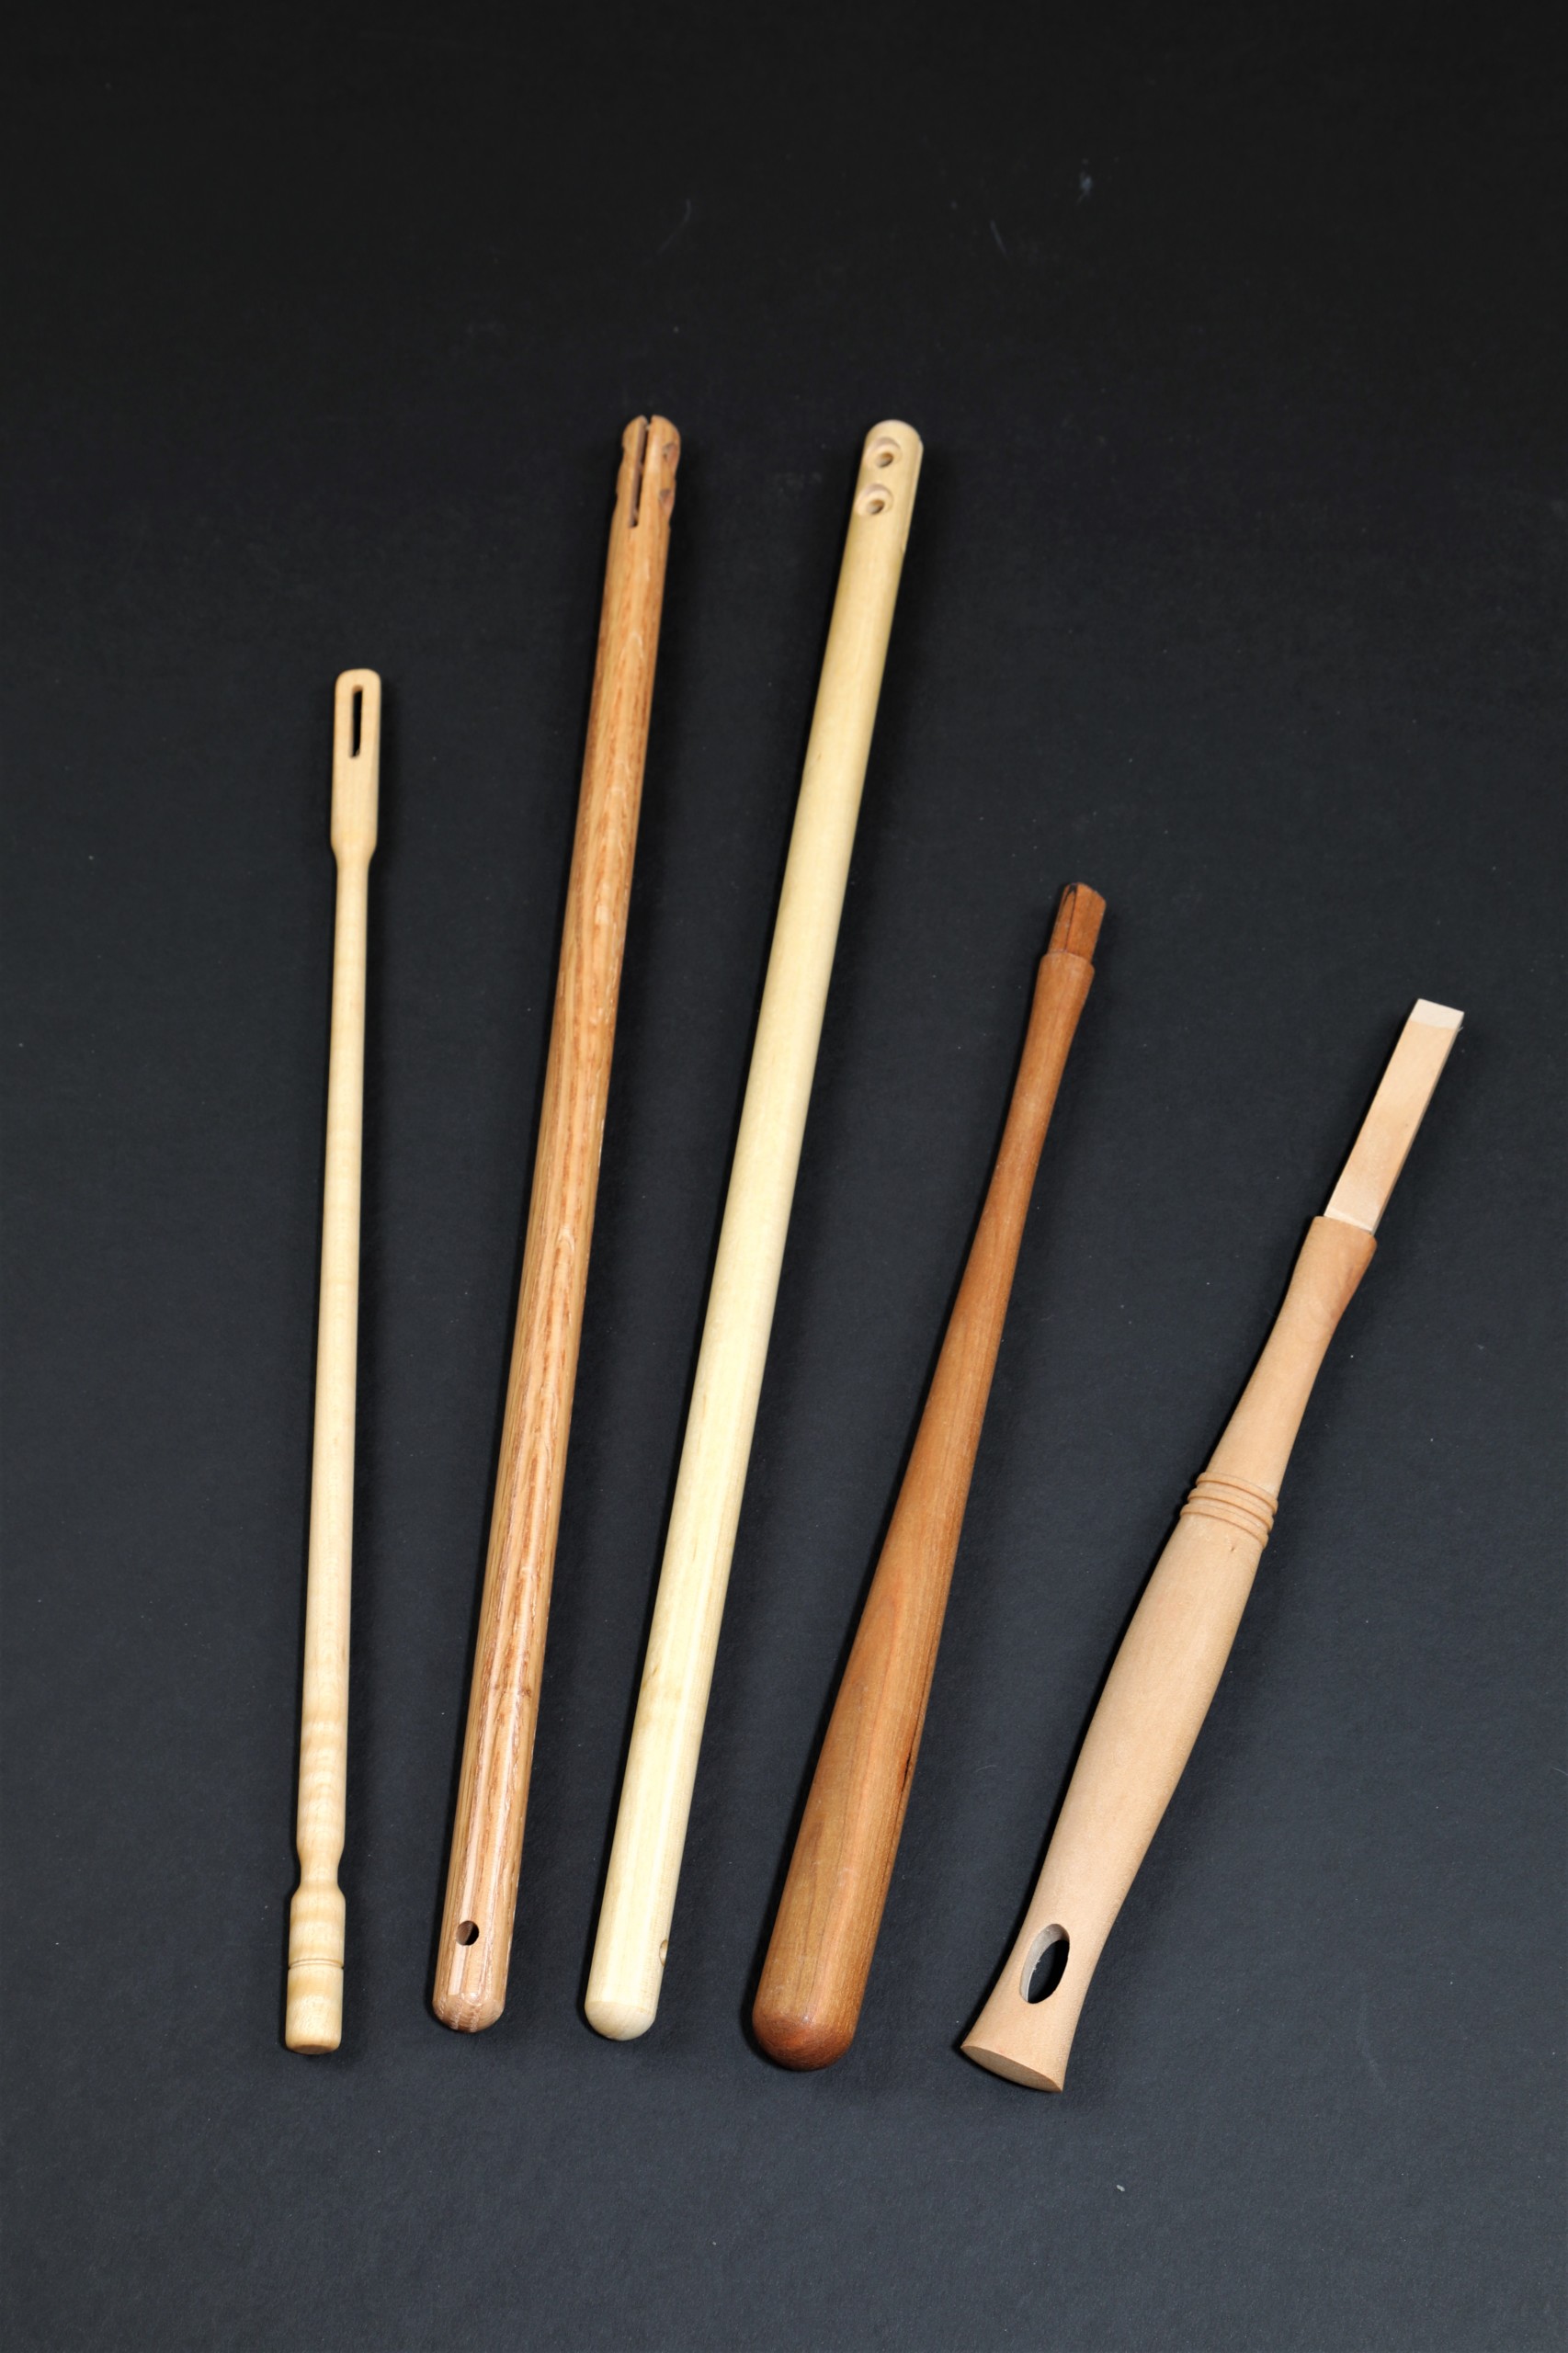 Wood handles available in variety of domestic species.